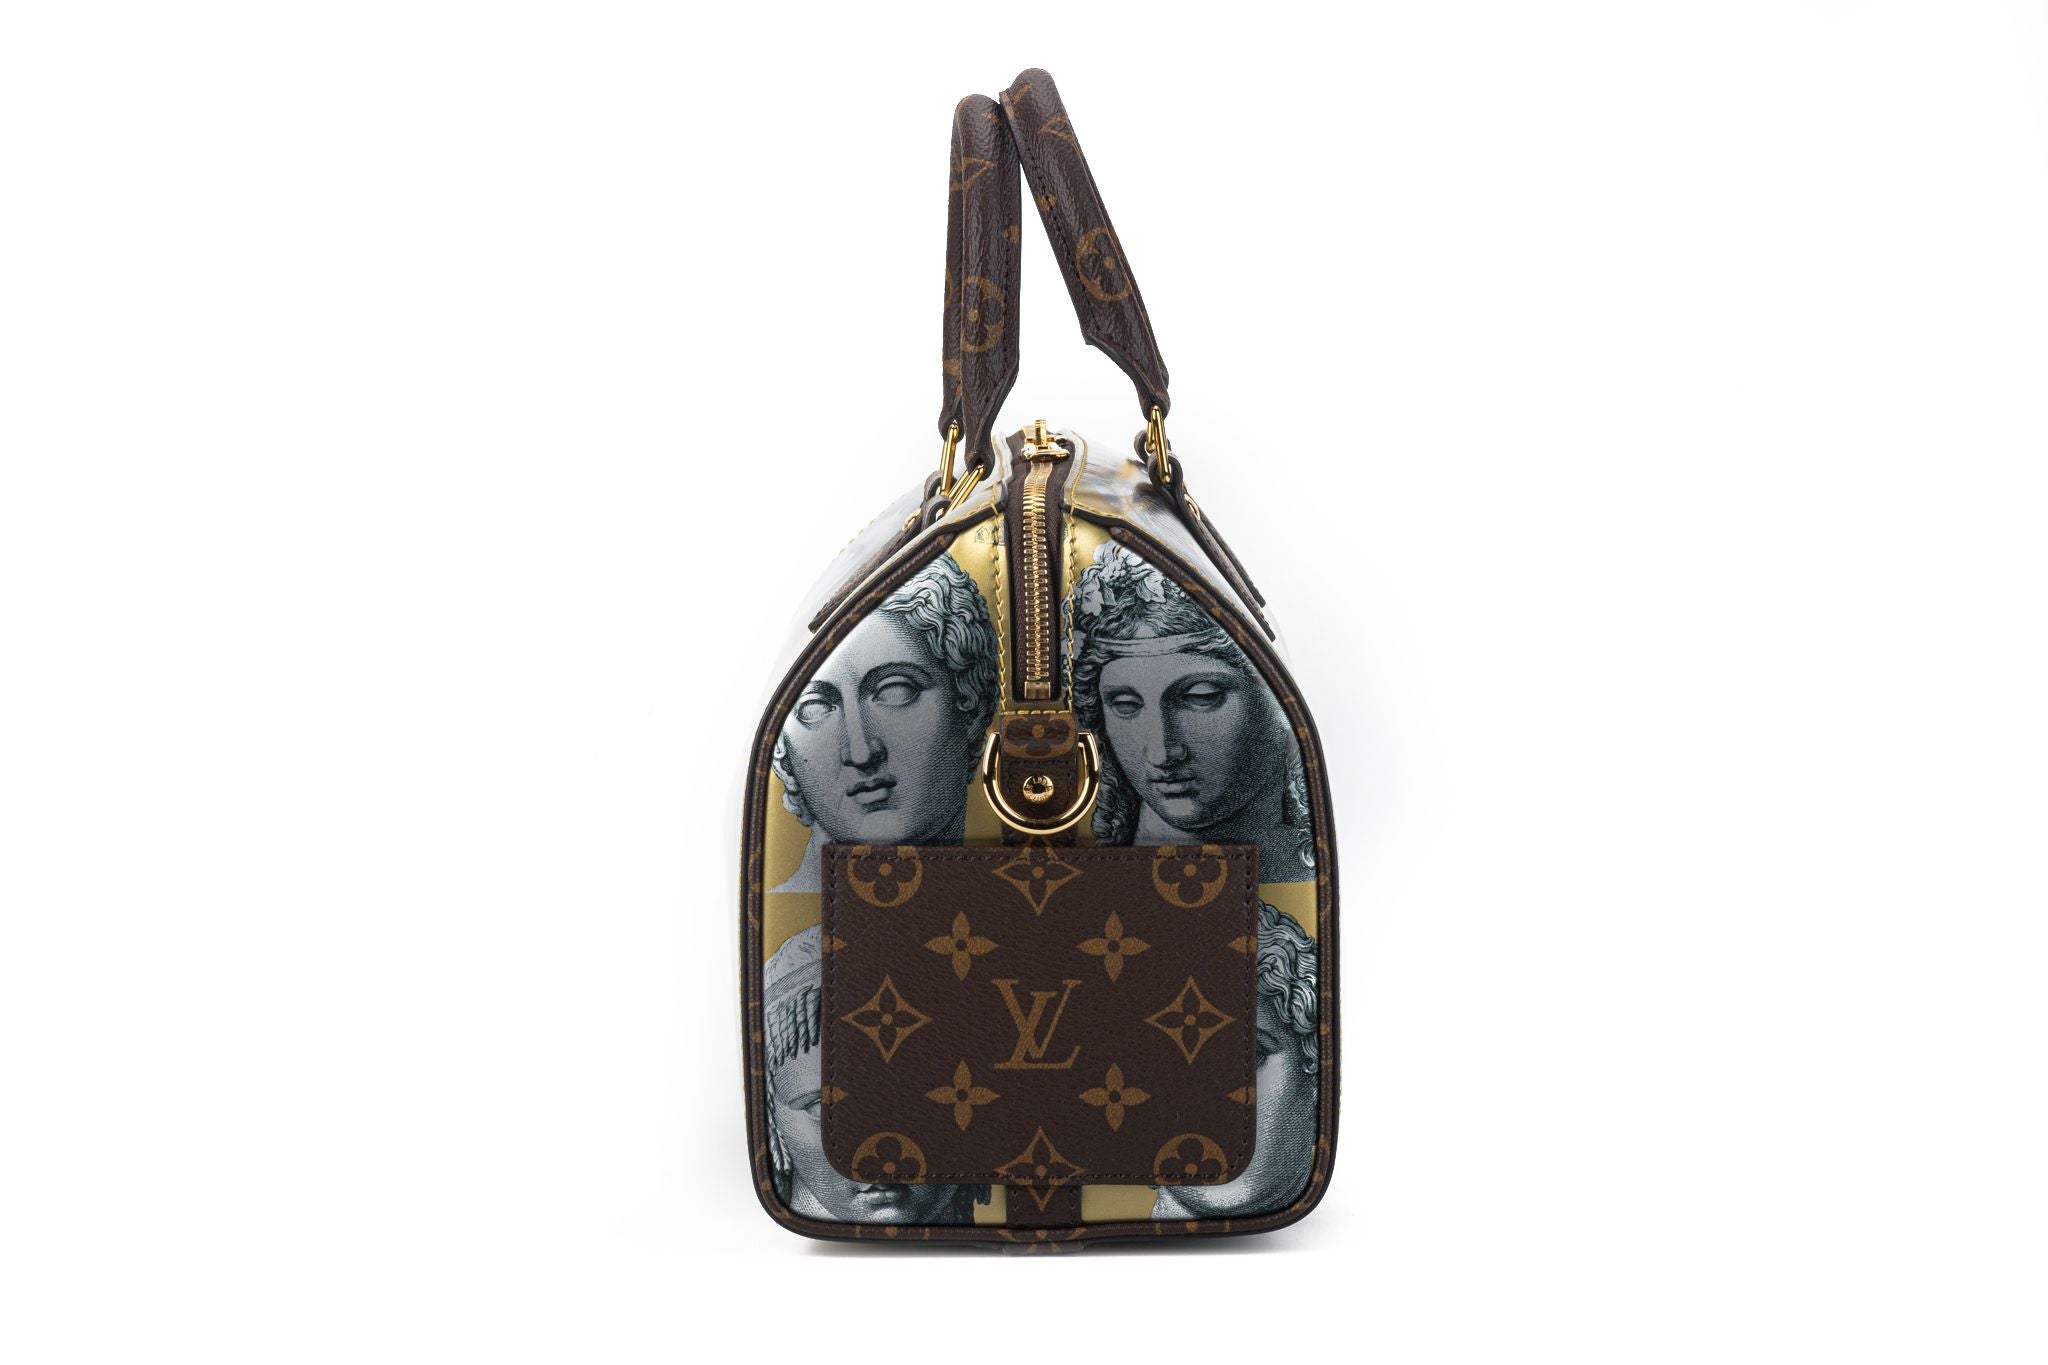 Louis Vuitton Speedy Bandouliere Bag Limited Edition Fornasetti